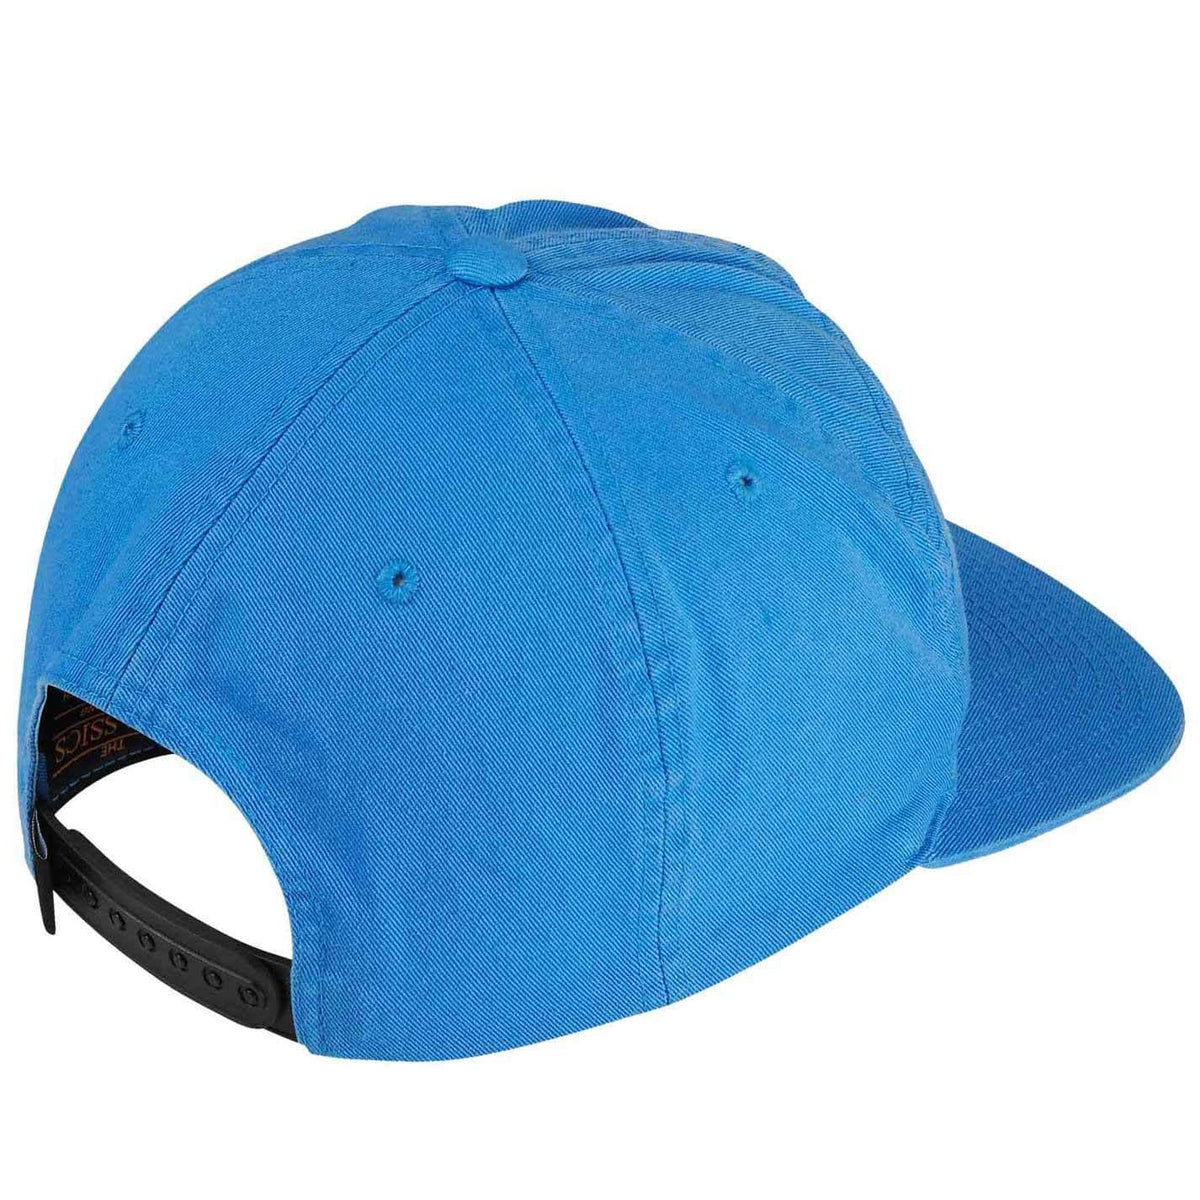 Hurley Octane Hat University Blue O/S (one size) 5 Panel Cap by Hurley